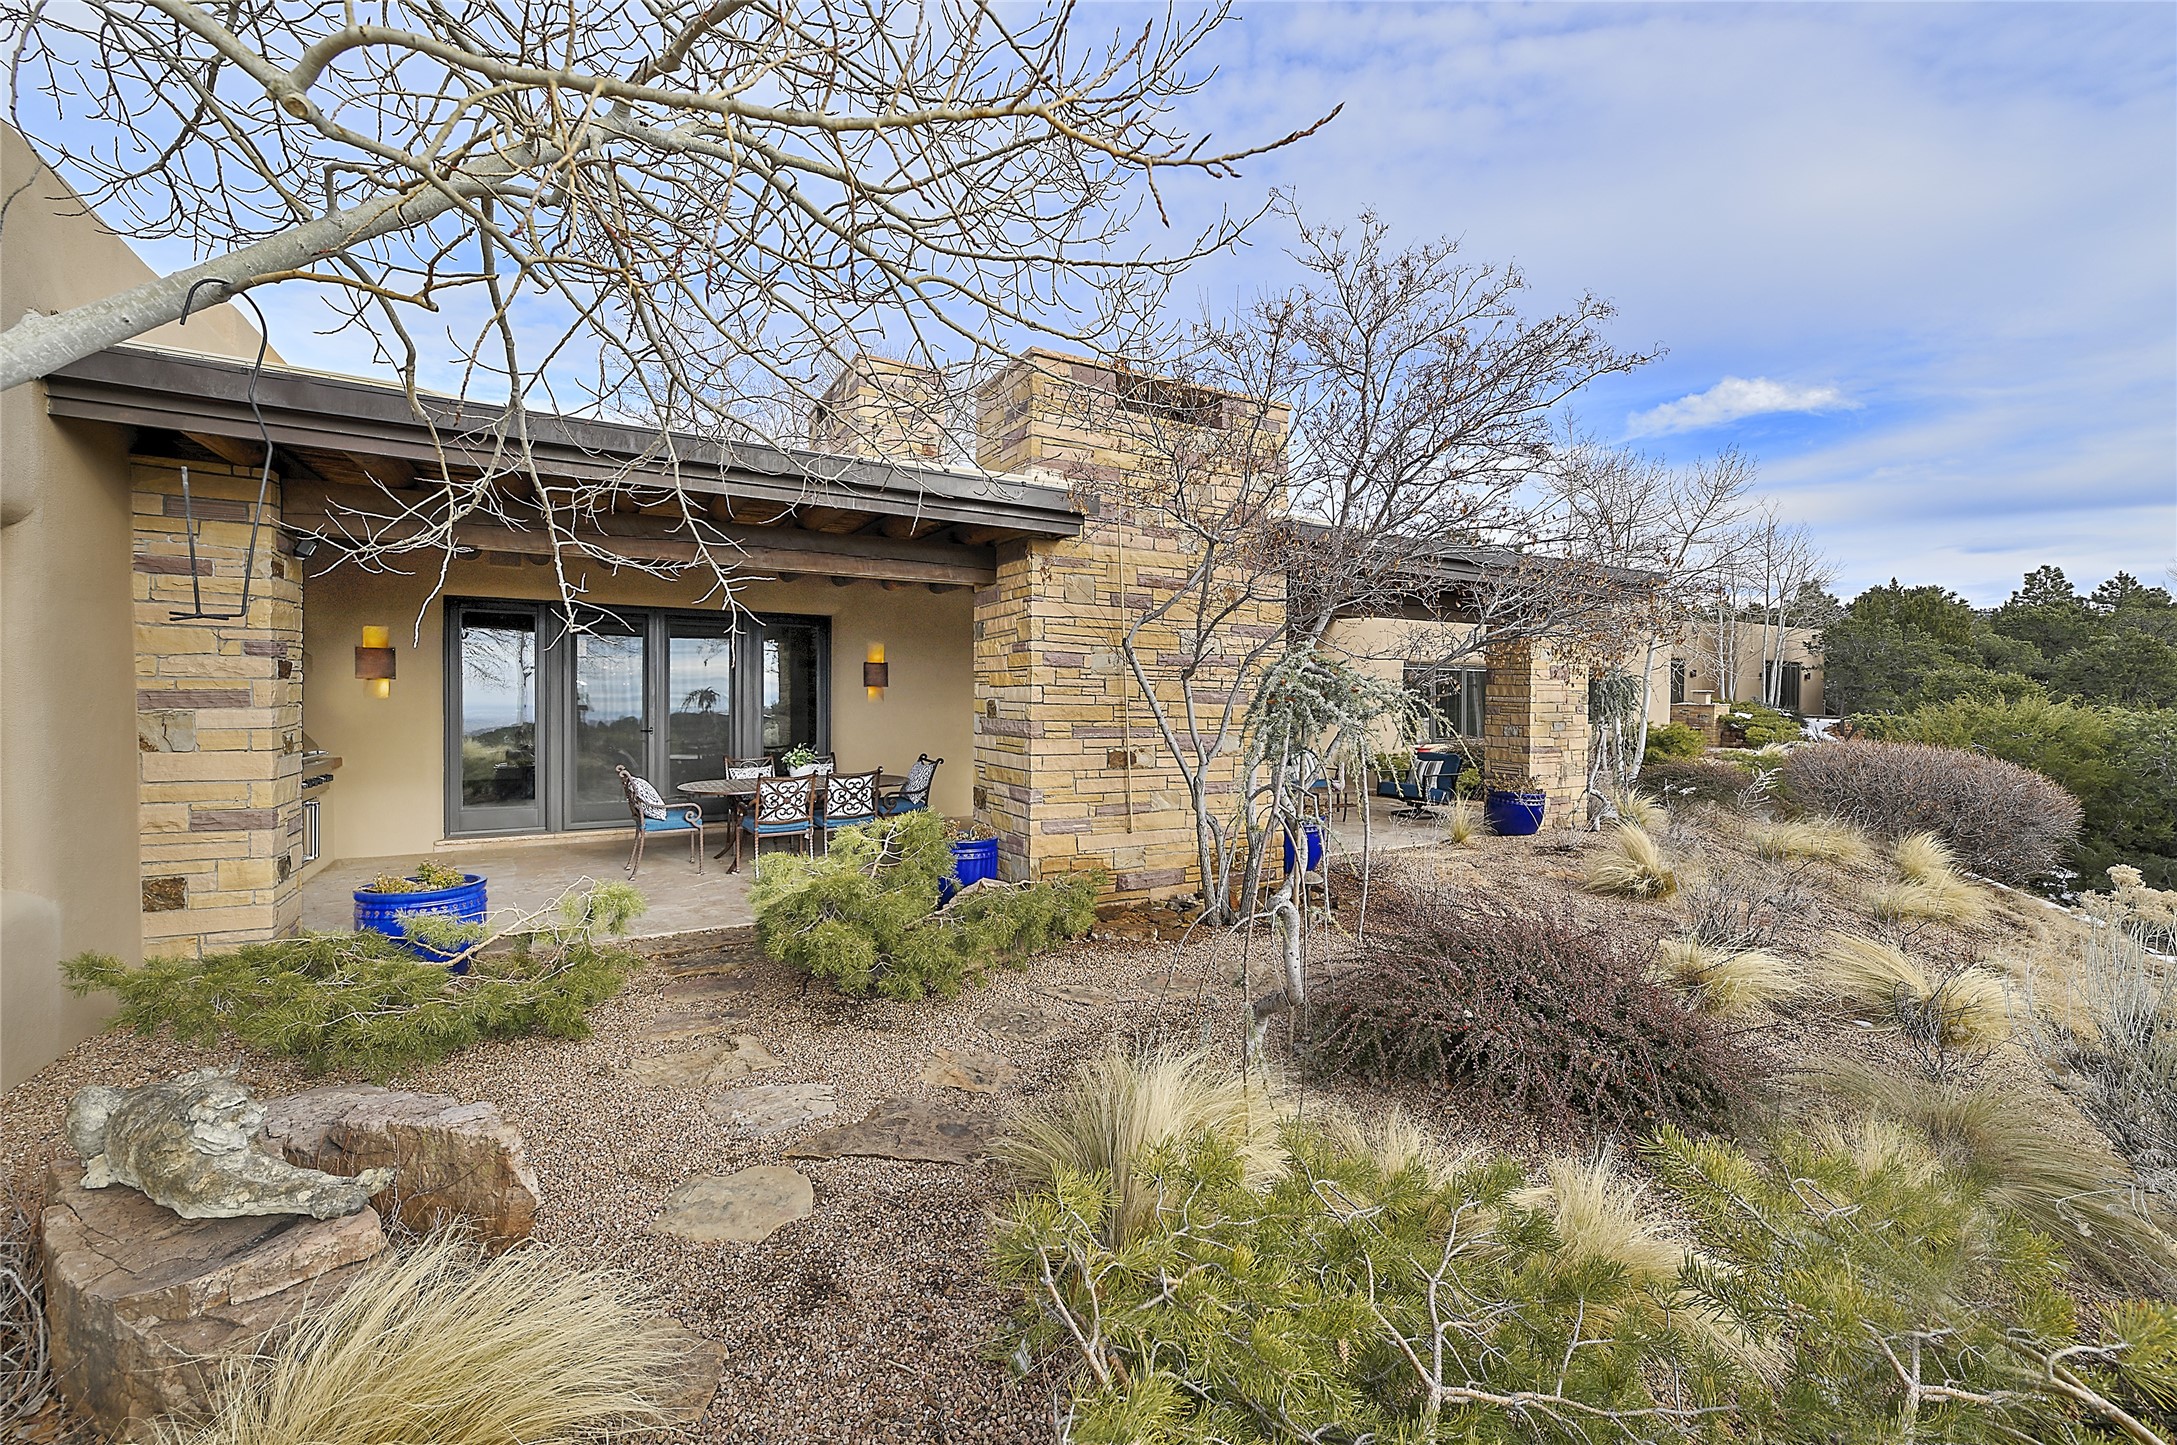 1432 Old Sunset, Santa Fe, New Mexico 87501, 4 Bedrooms Bedrooms, ,6 BathroomsBathrooms,Residential,For Sale,1432 Old Sunset,202342222